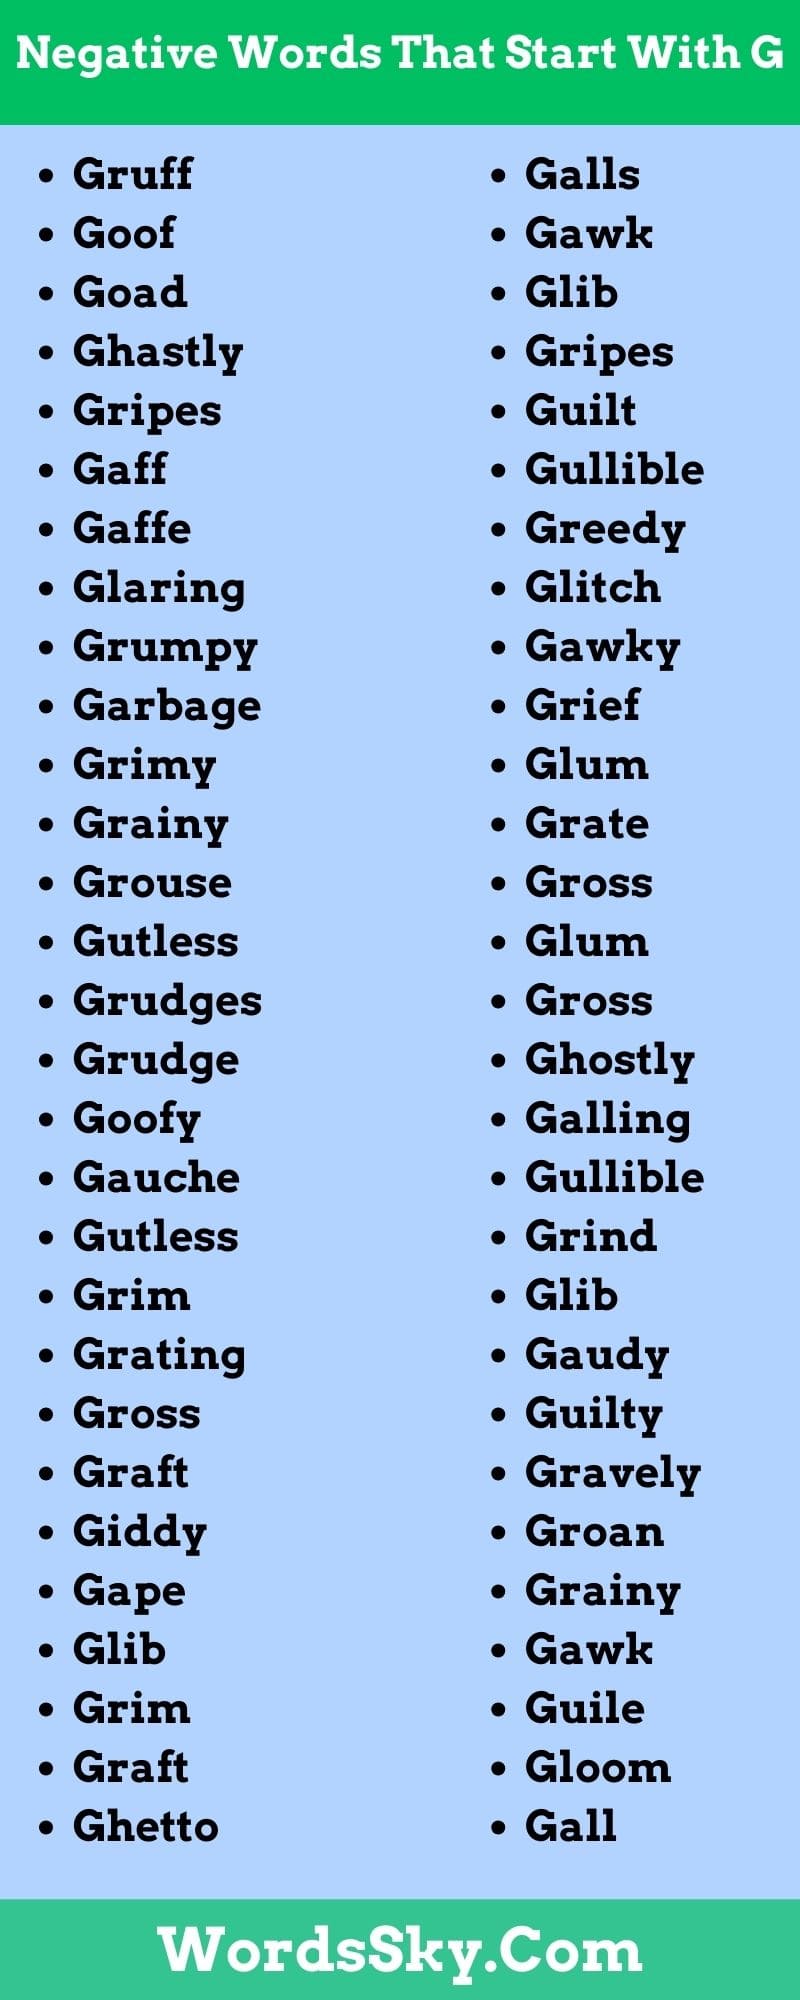 Negative Words That Start With G